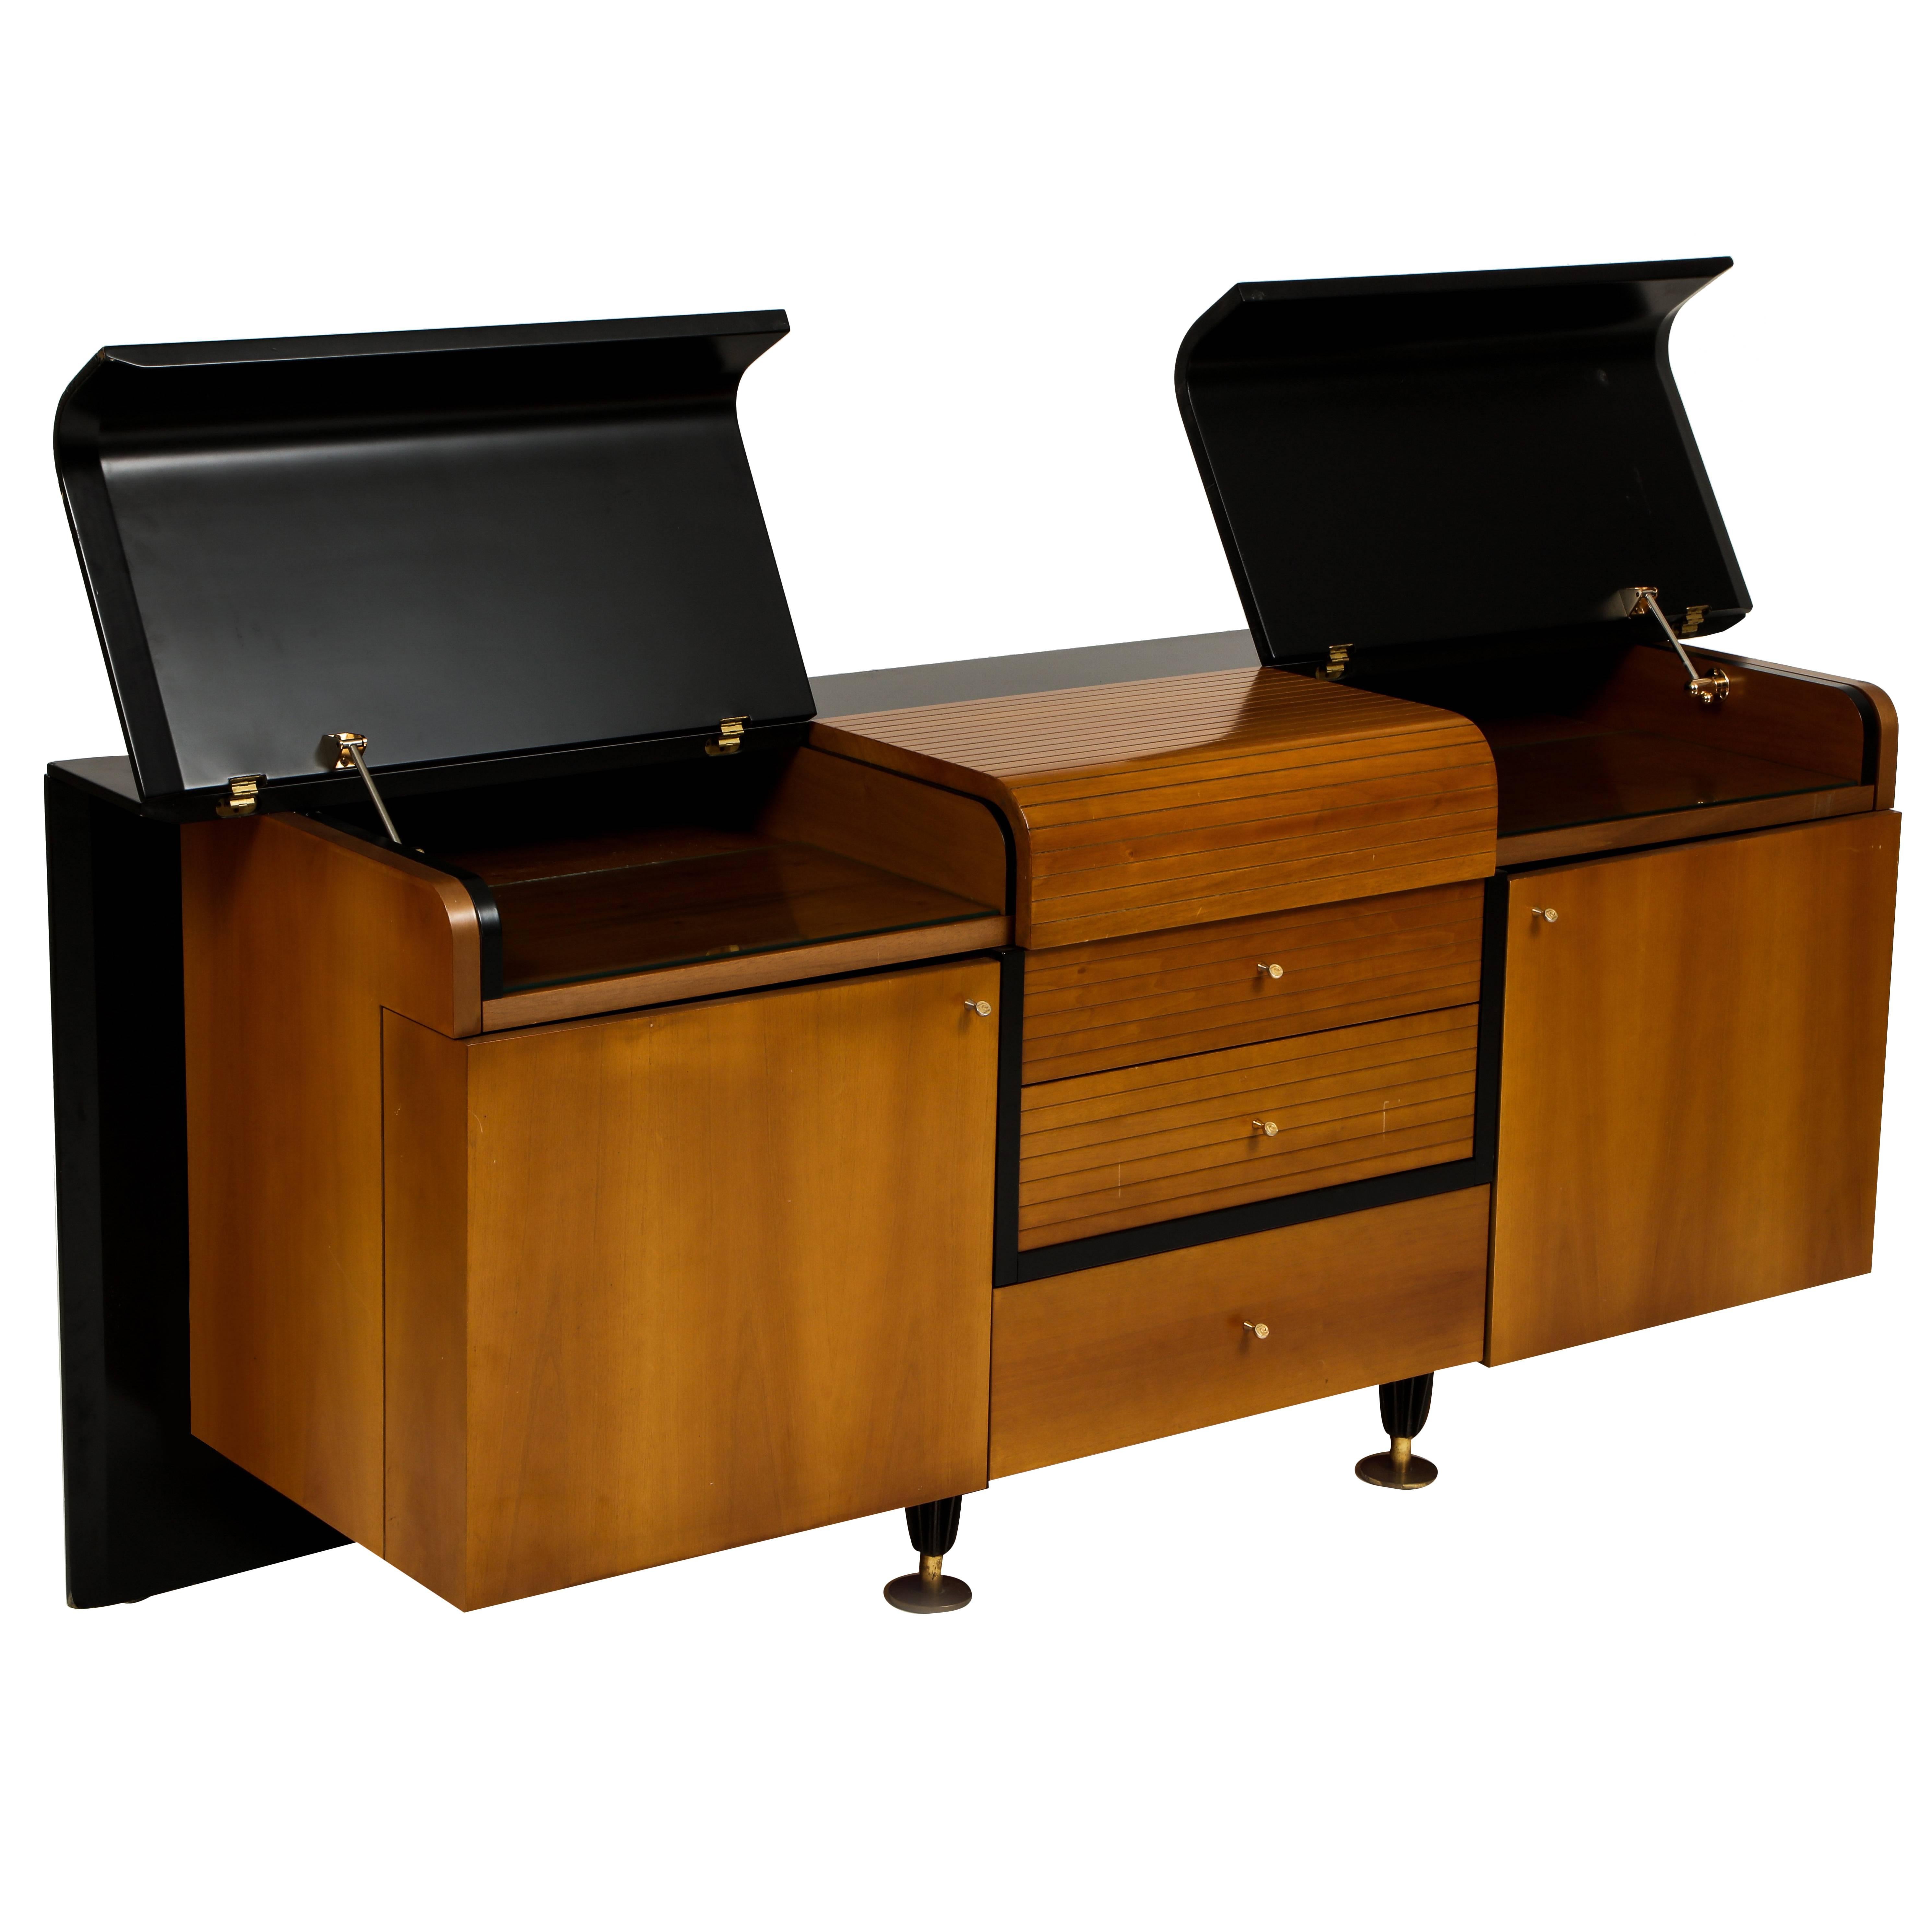 Pierre Cardin sideboard buffet black and wood, 1980s-1990s.

This rare sideboard is in excellent vintage condition with two top sides that come up and plenty of storage.
It is made of laminate and wood with brass details throughout.
There is a